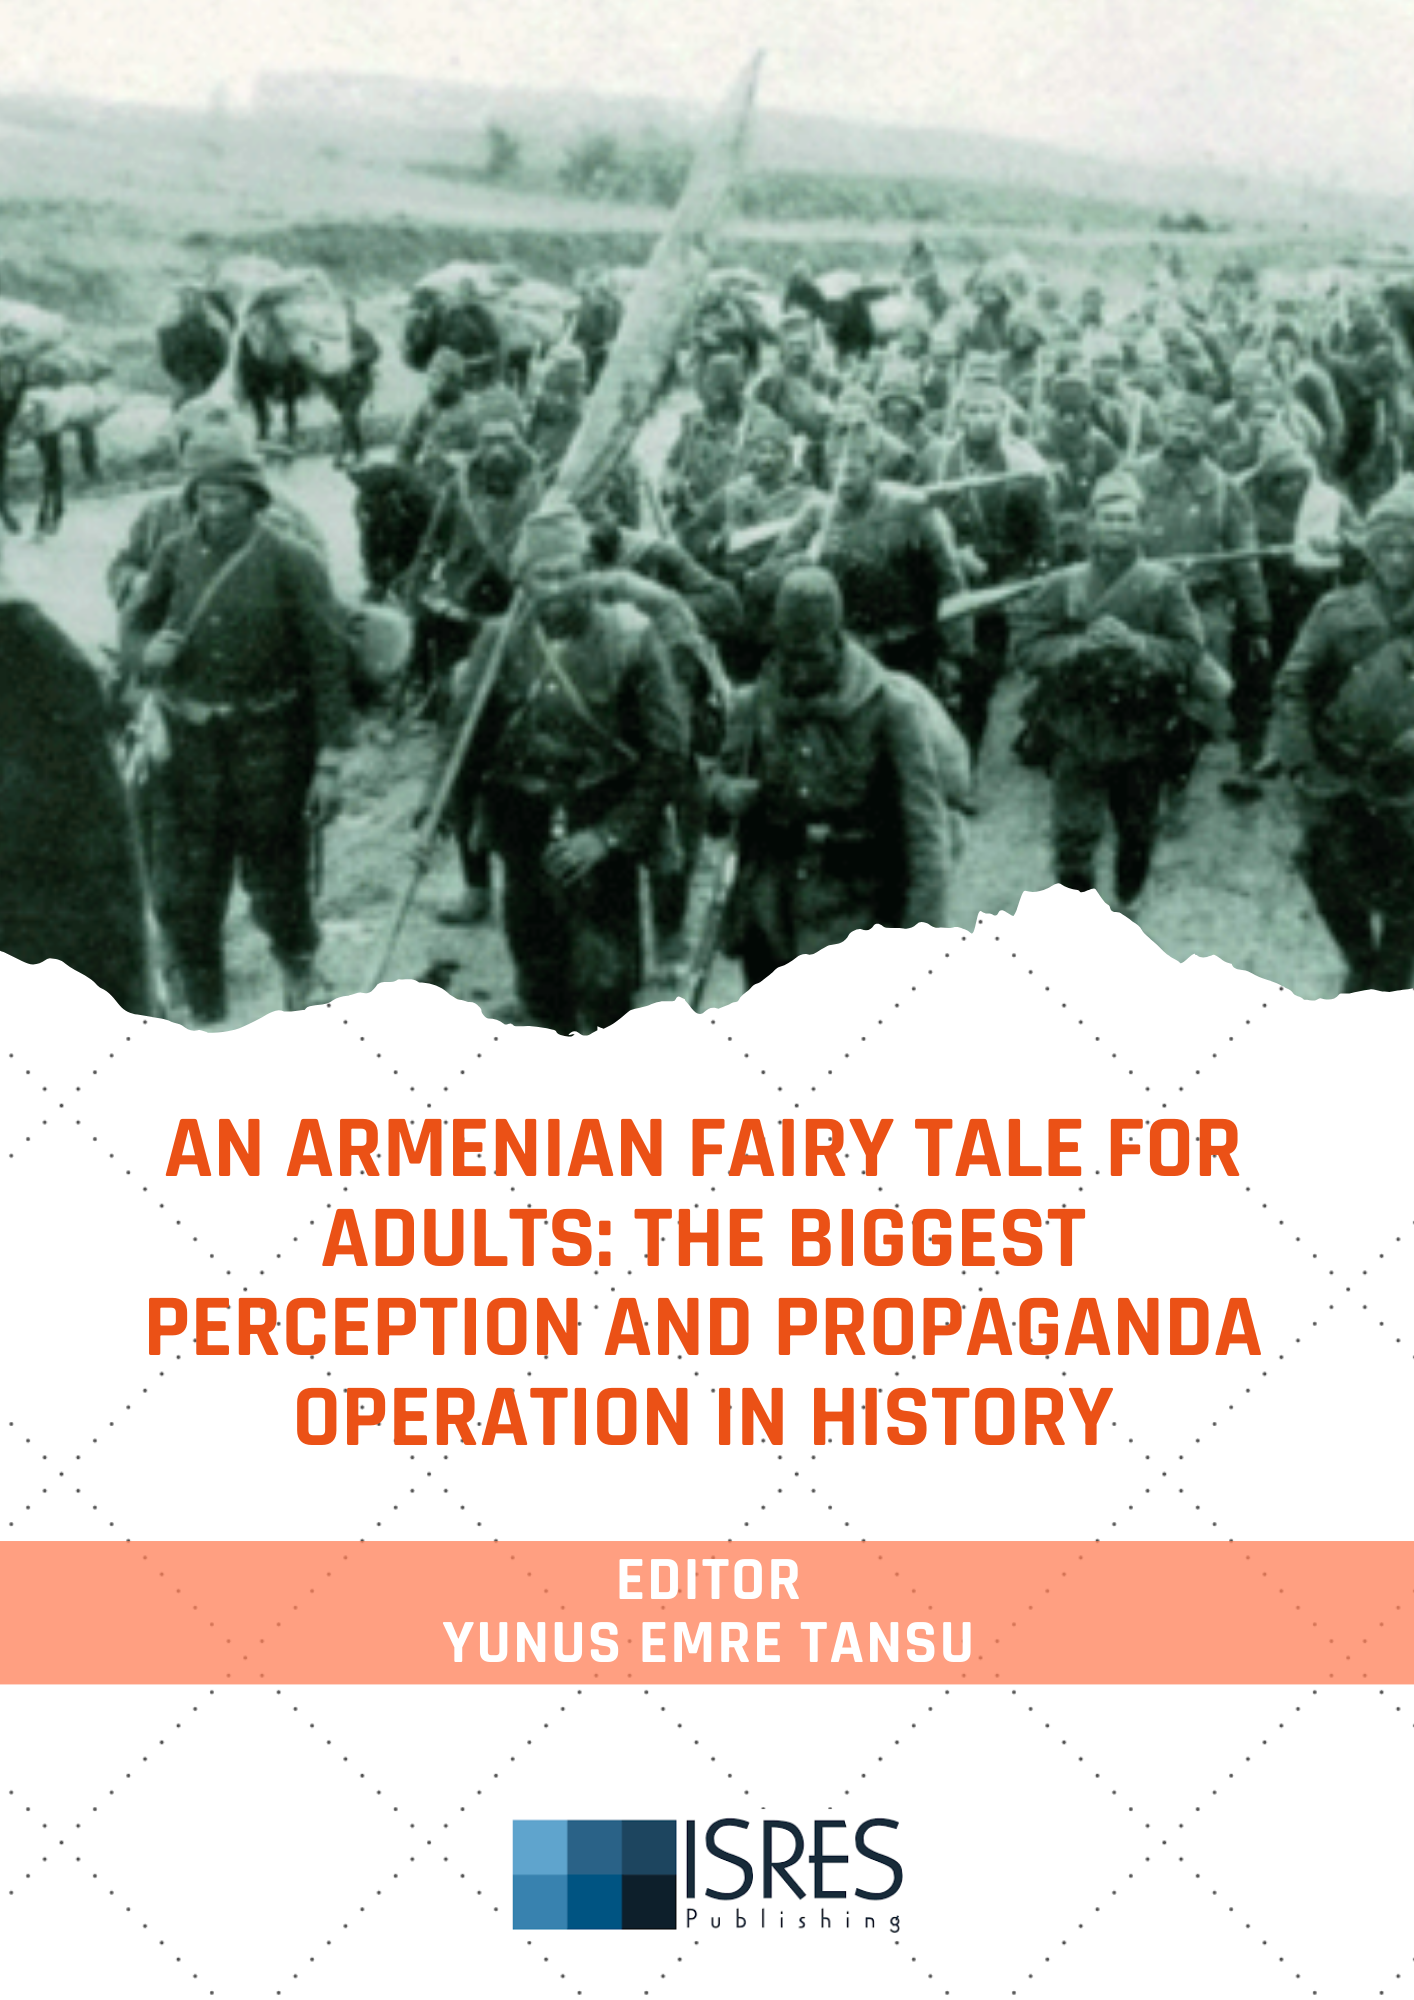 An Armenian Fairy Tale for Adults: The Biggest Perception and Propaganda Operation in History